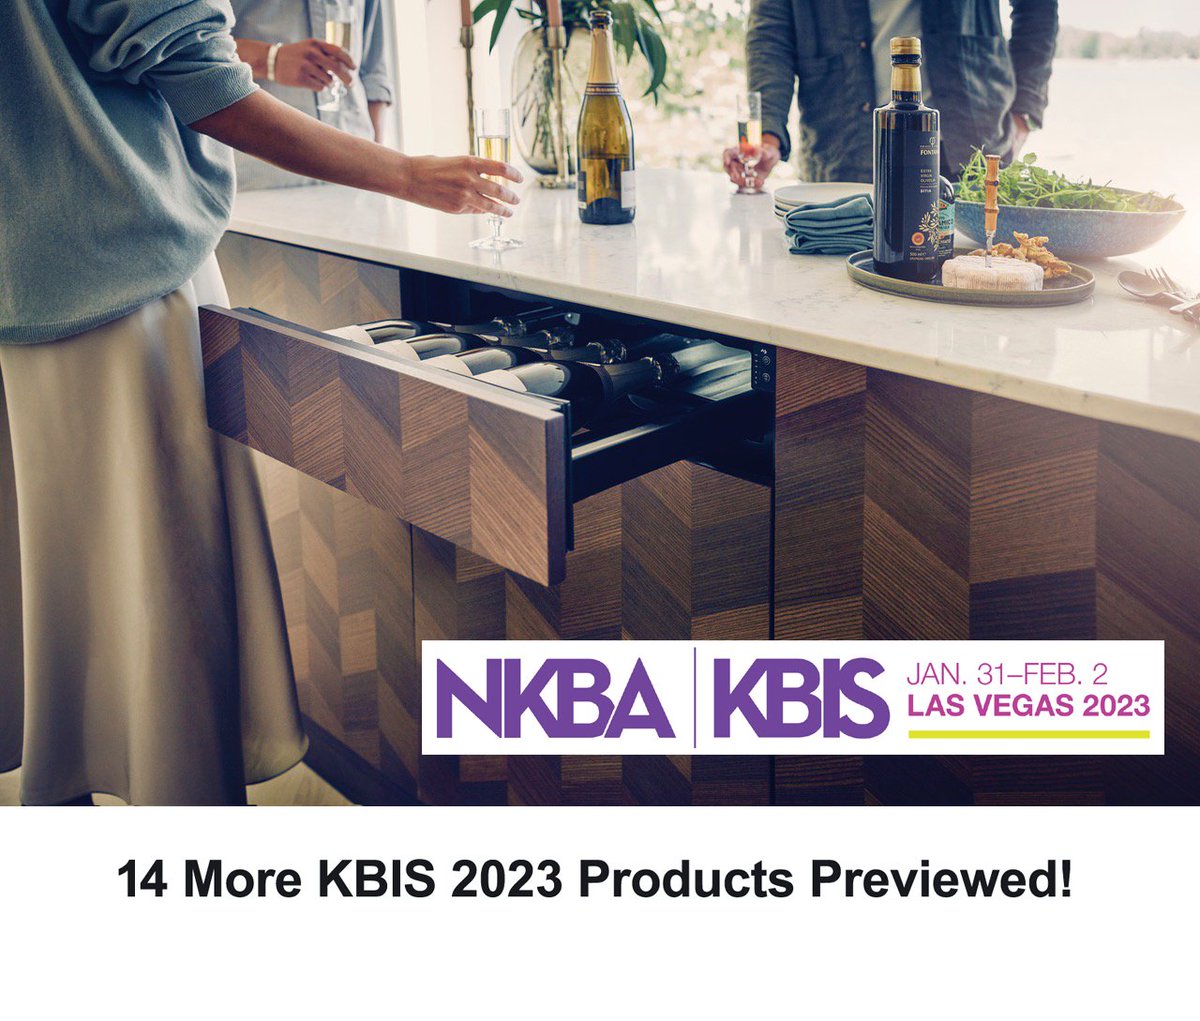 Check out these hot new Kitchen & bathroom products!

tinyurl.com/5472sn65

#Kbis #kbis2023 #kitchendesign #bathroomdesign #bathroomremodel #kitchenremodel @KBIS
 @thenkba #kitchentrends #BuildersRemedy #builder #Builders #ibs2023 #dcw2023 #buildersshow